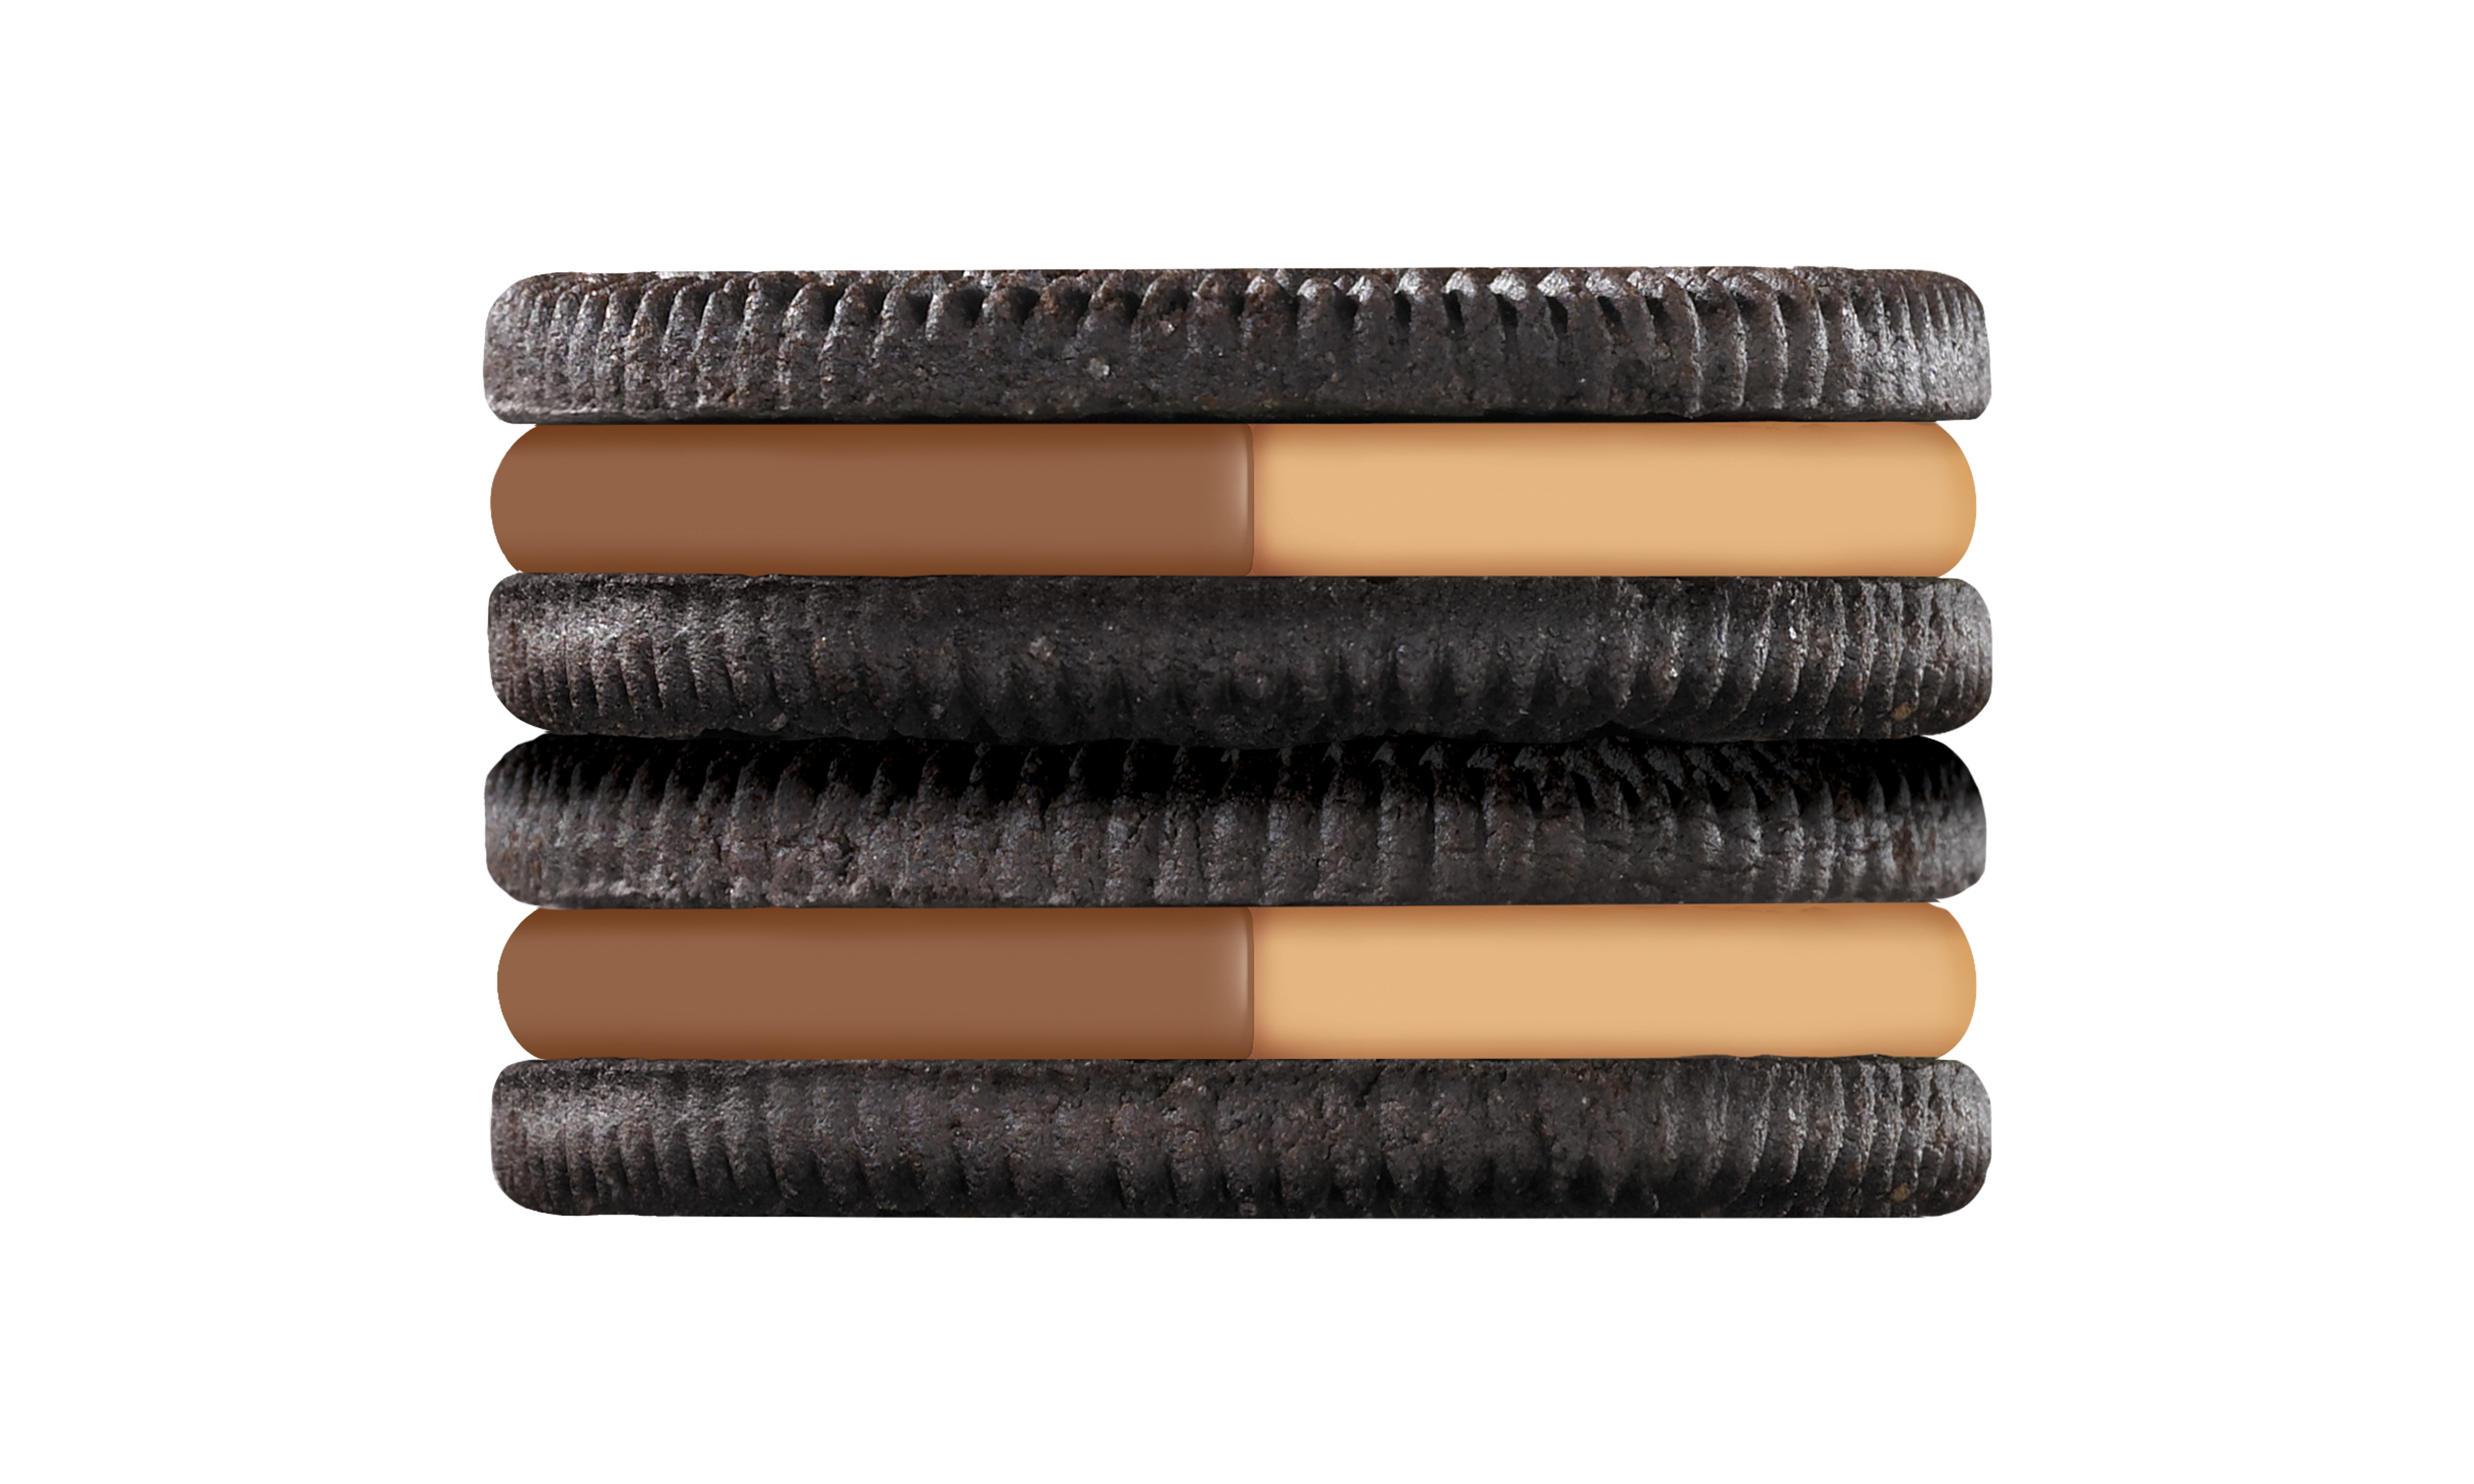 Nabisco Reese's Oreo Peanut Butter Cup Creme Chocolate Sandwich Cookies, 12.2 Oz. - image 4 of 6